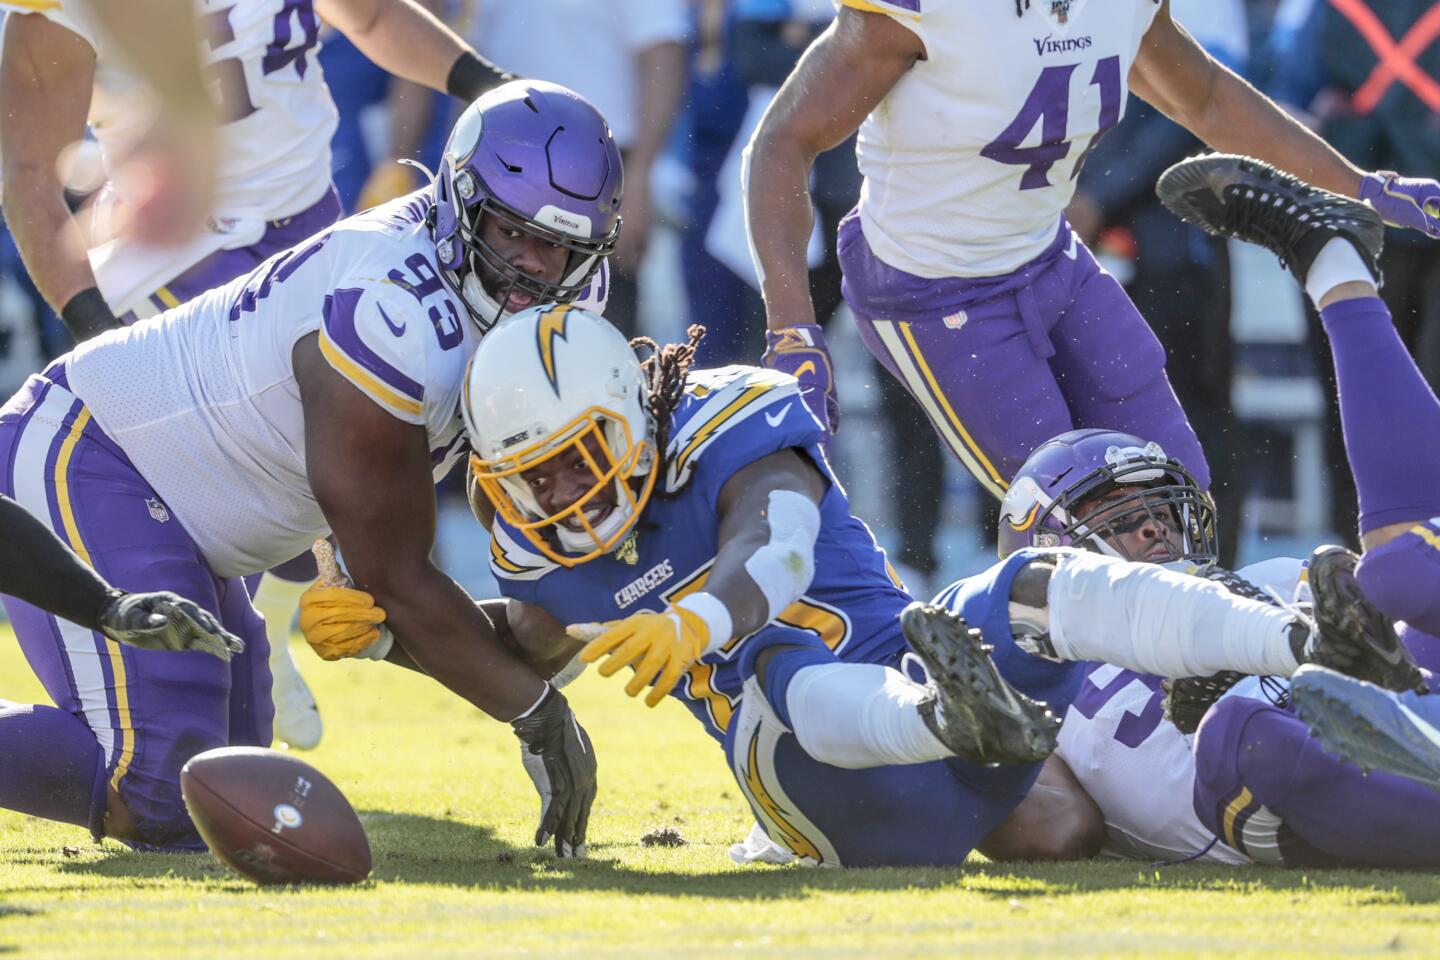 CARSON, CA, SUNDAY, DECEMBER 15, 2019 - Los Angeles Chargers running back Melvin Gordon (25) fumbles the ball during a first quarter drive against the Vikings at Dignity Health Sports Park. (Robert Gauthier/Los Angeles Times)